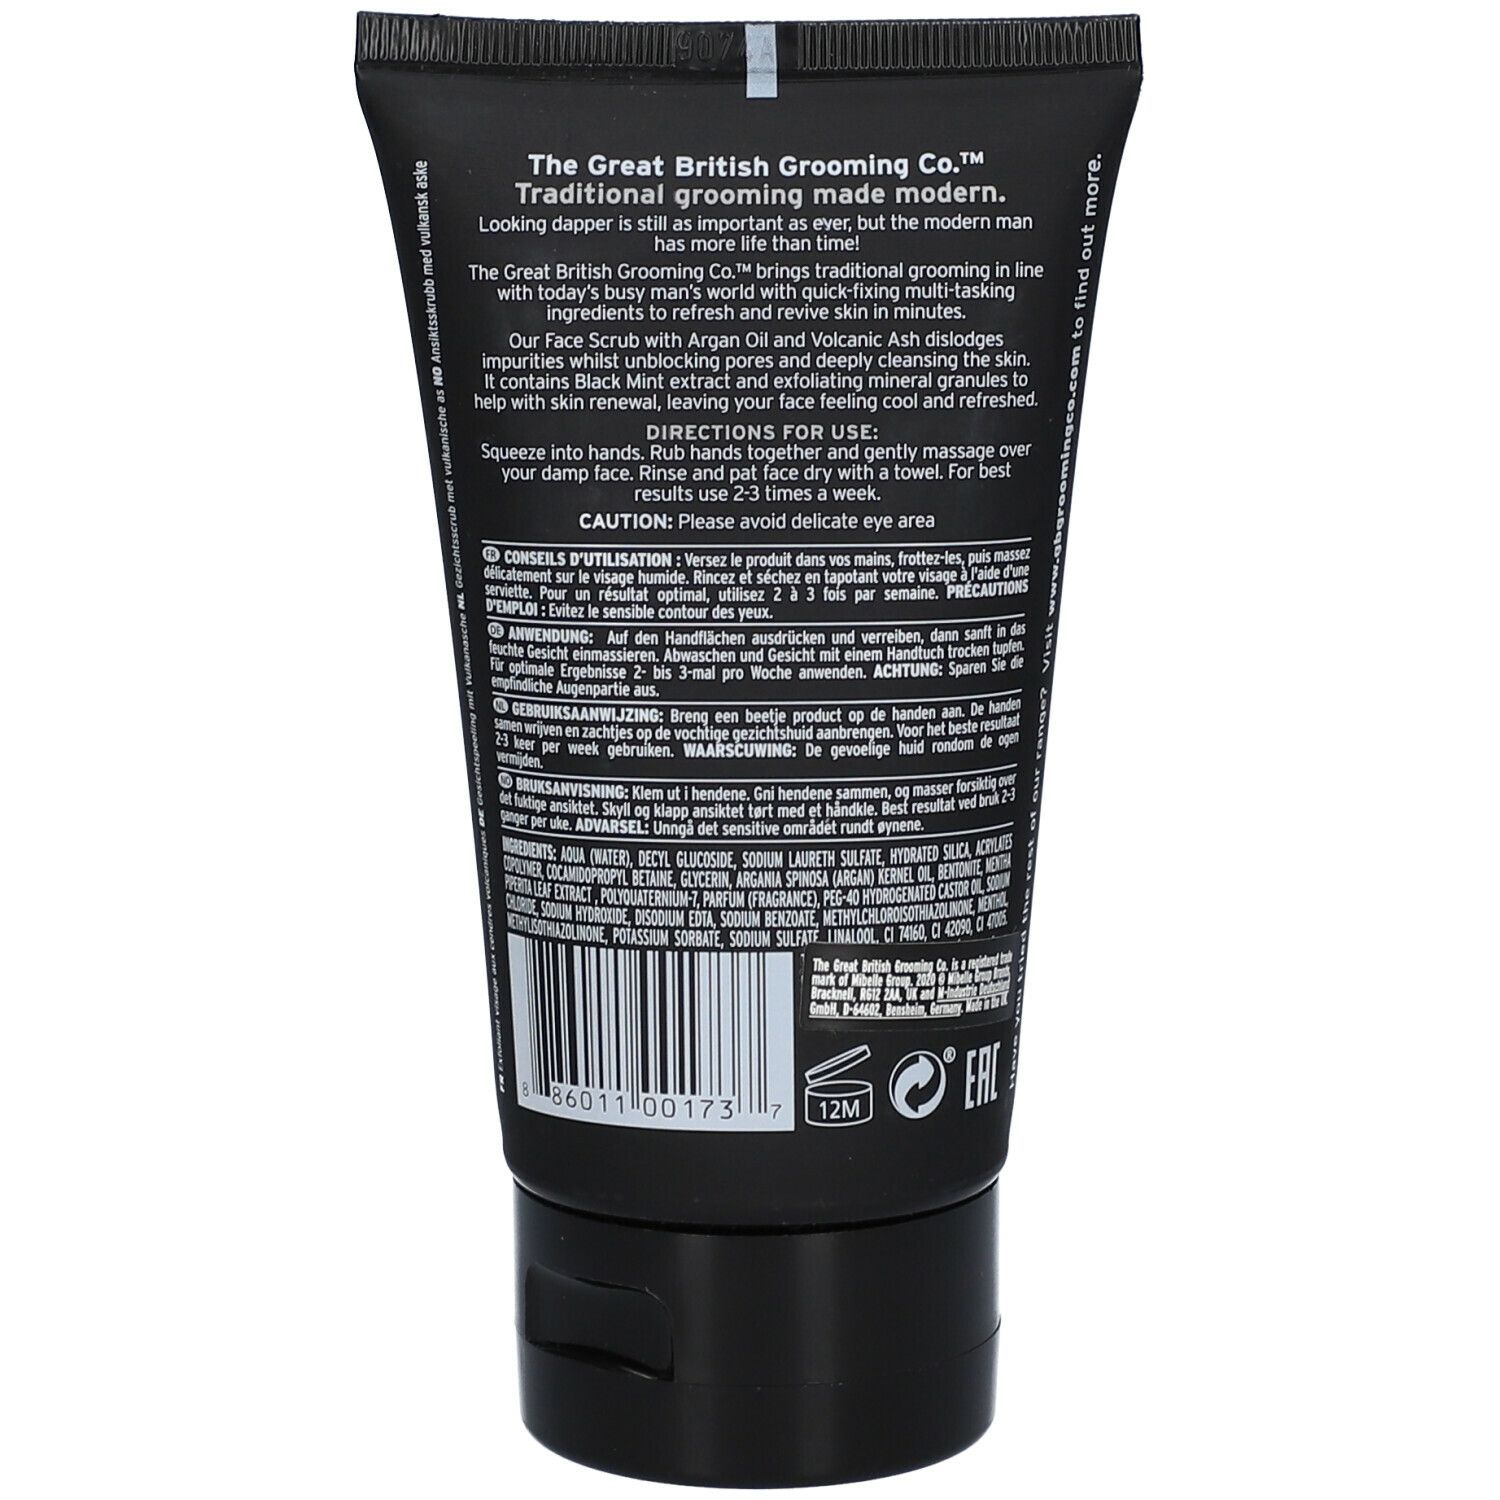 The Great British Grooming Company Exfoliating Face Scrub